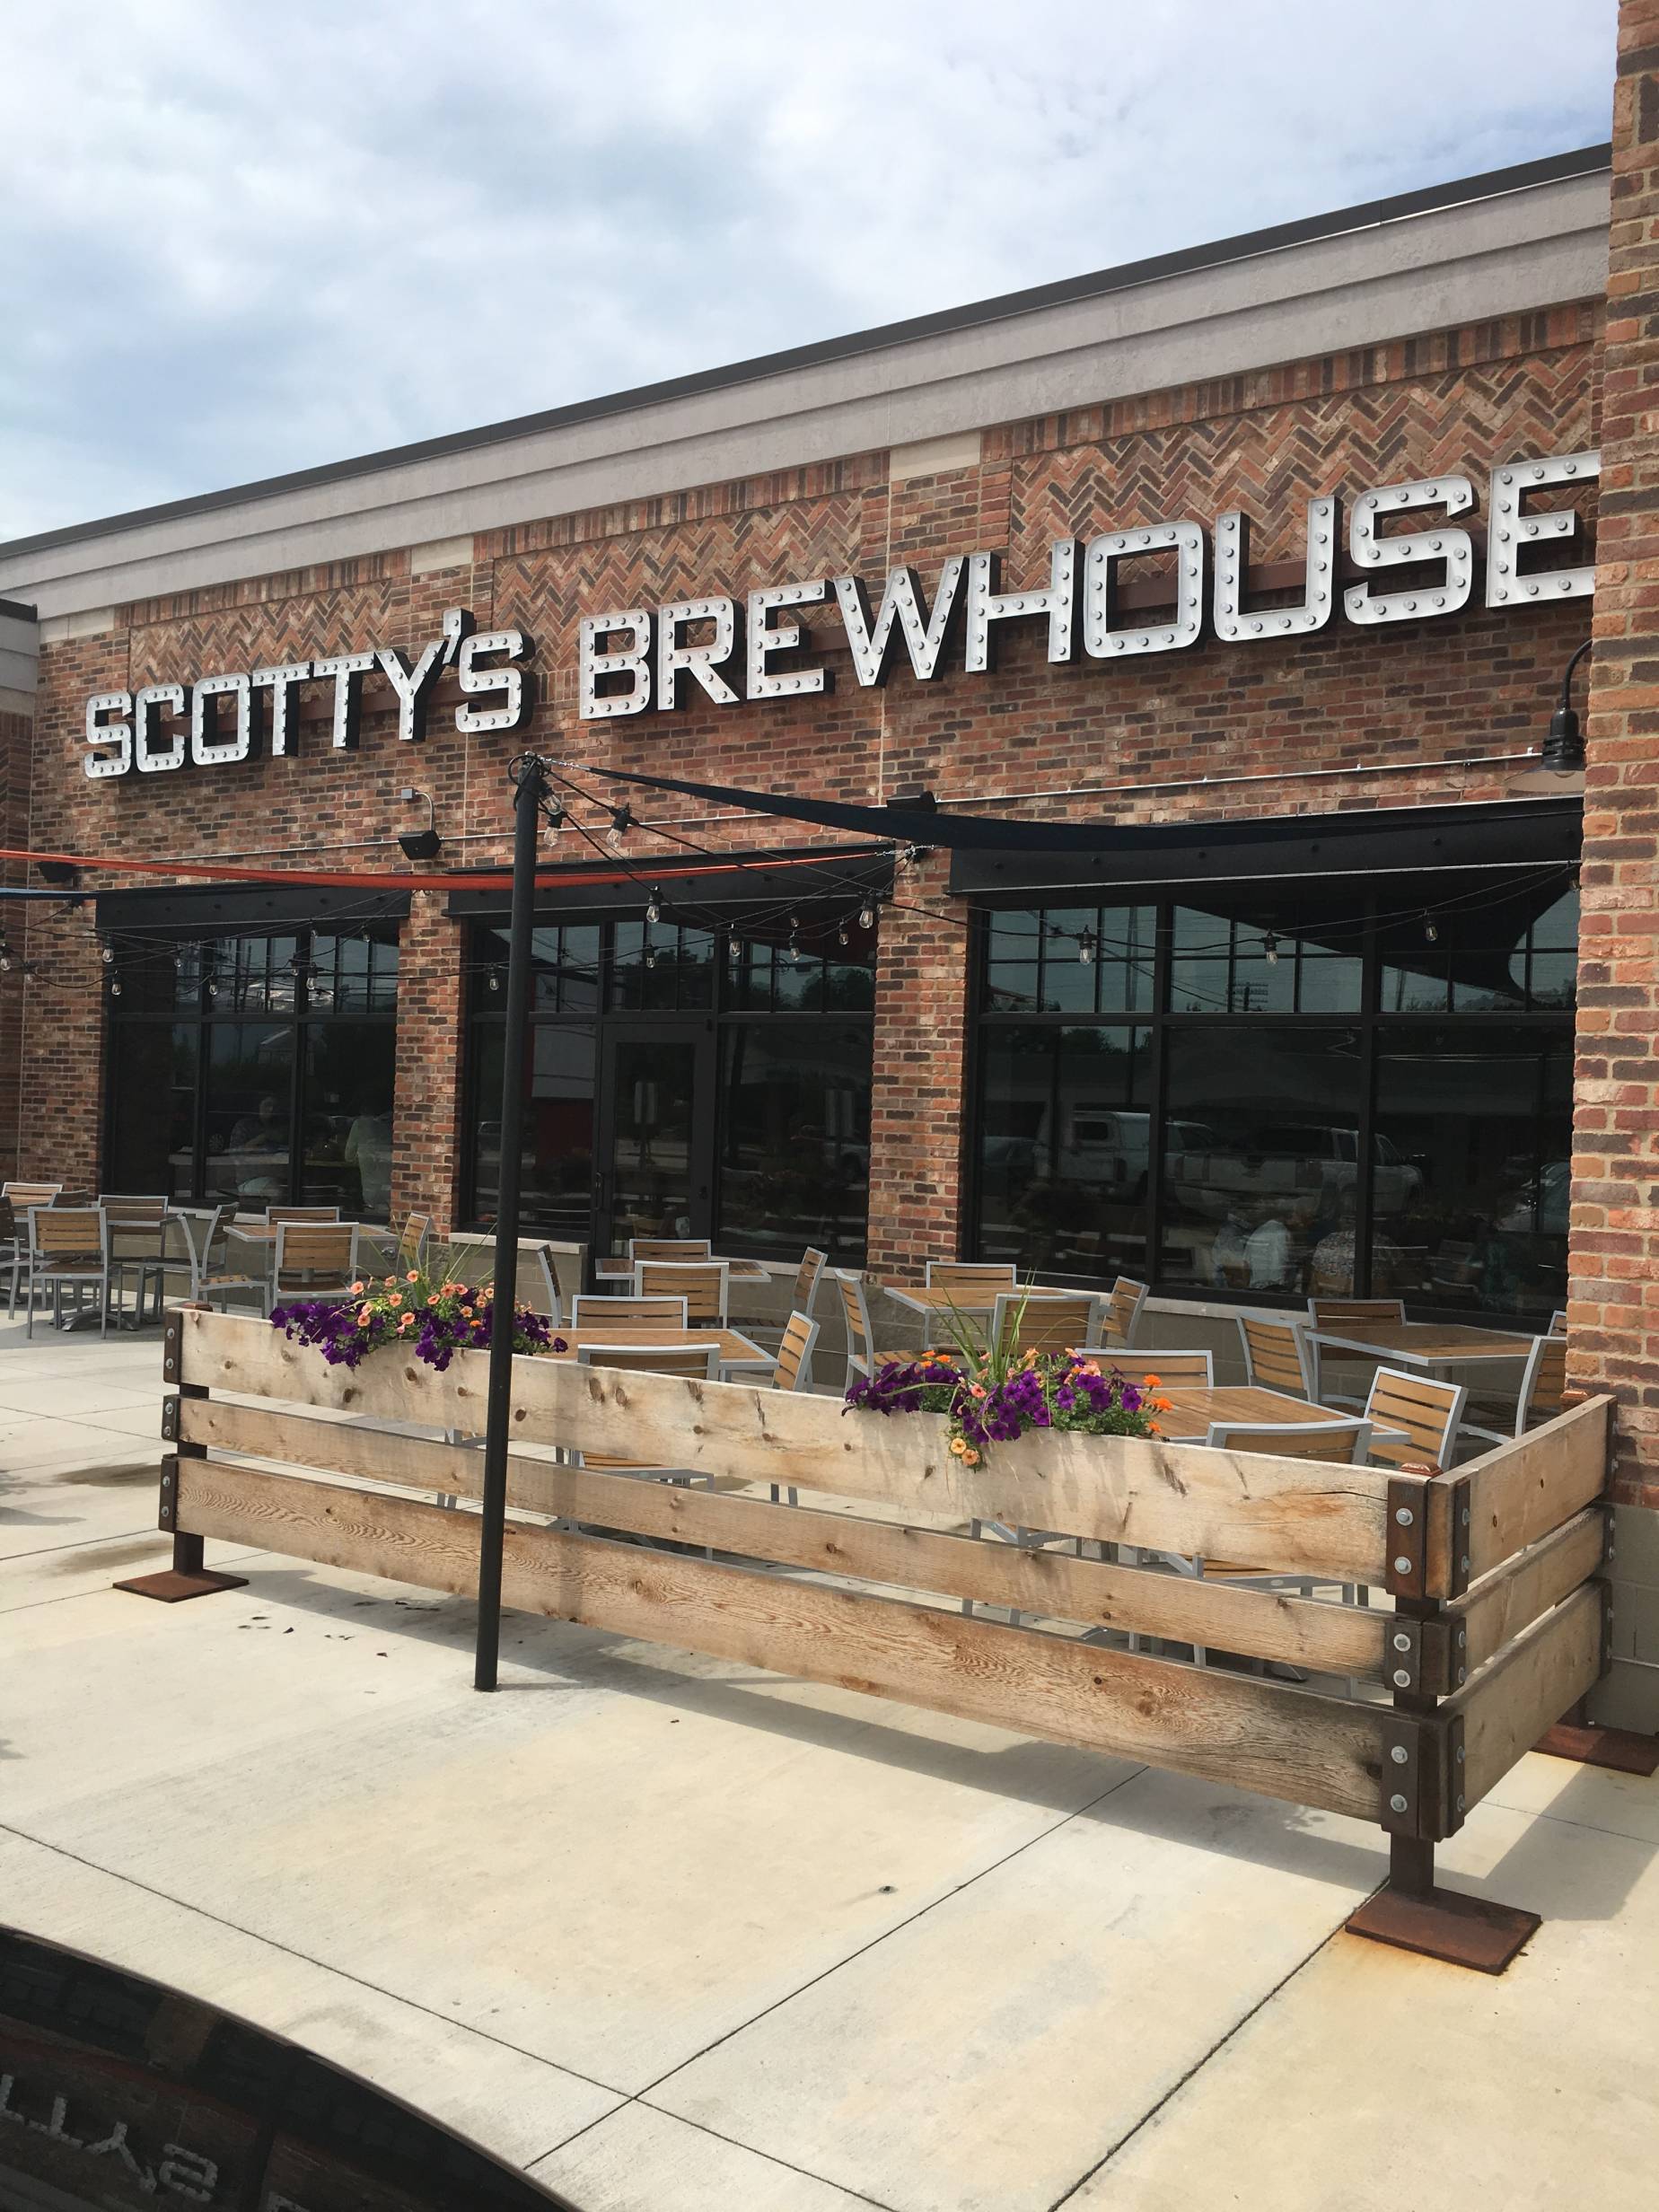 Scotty’s Brewhouse has burgers, beer, and bar fare